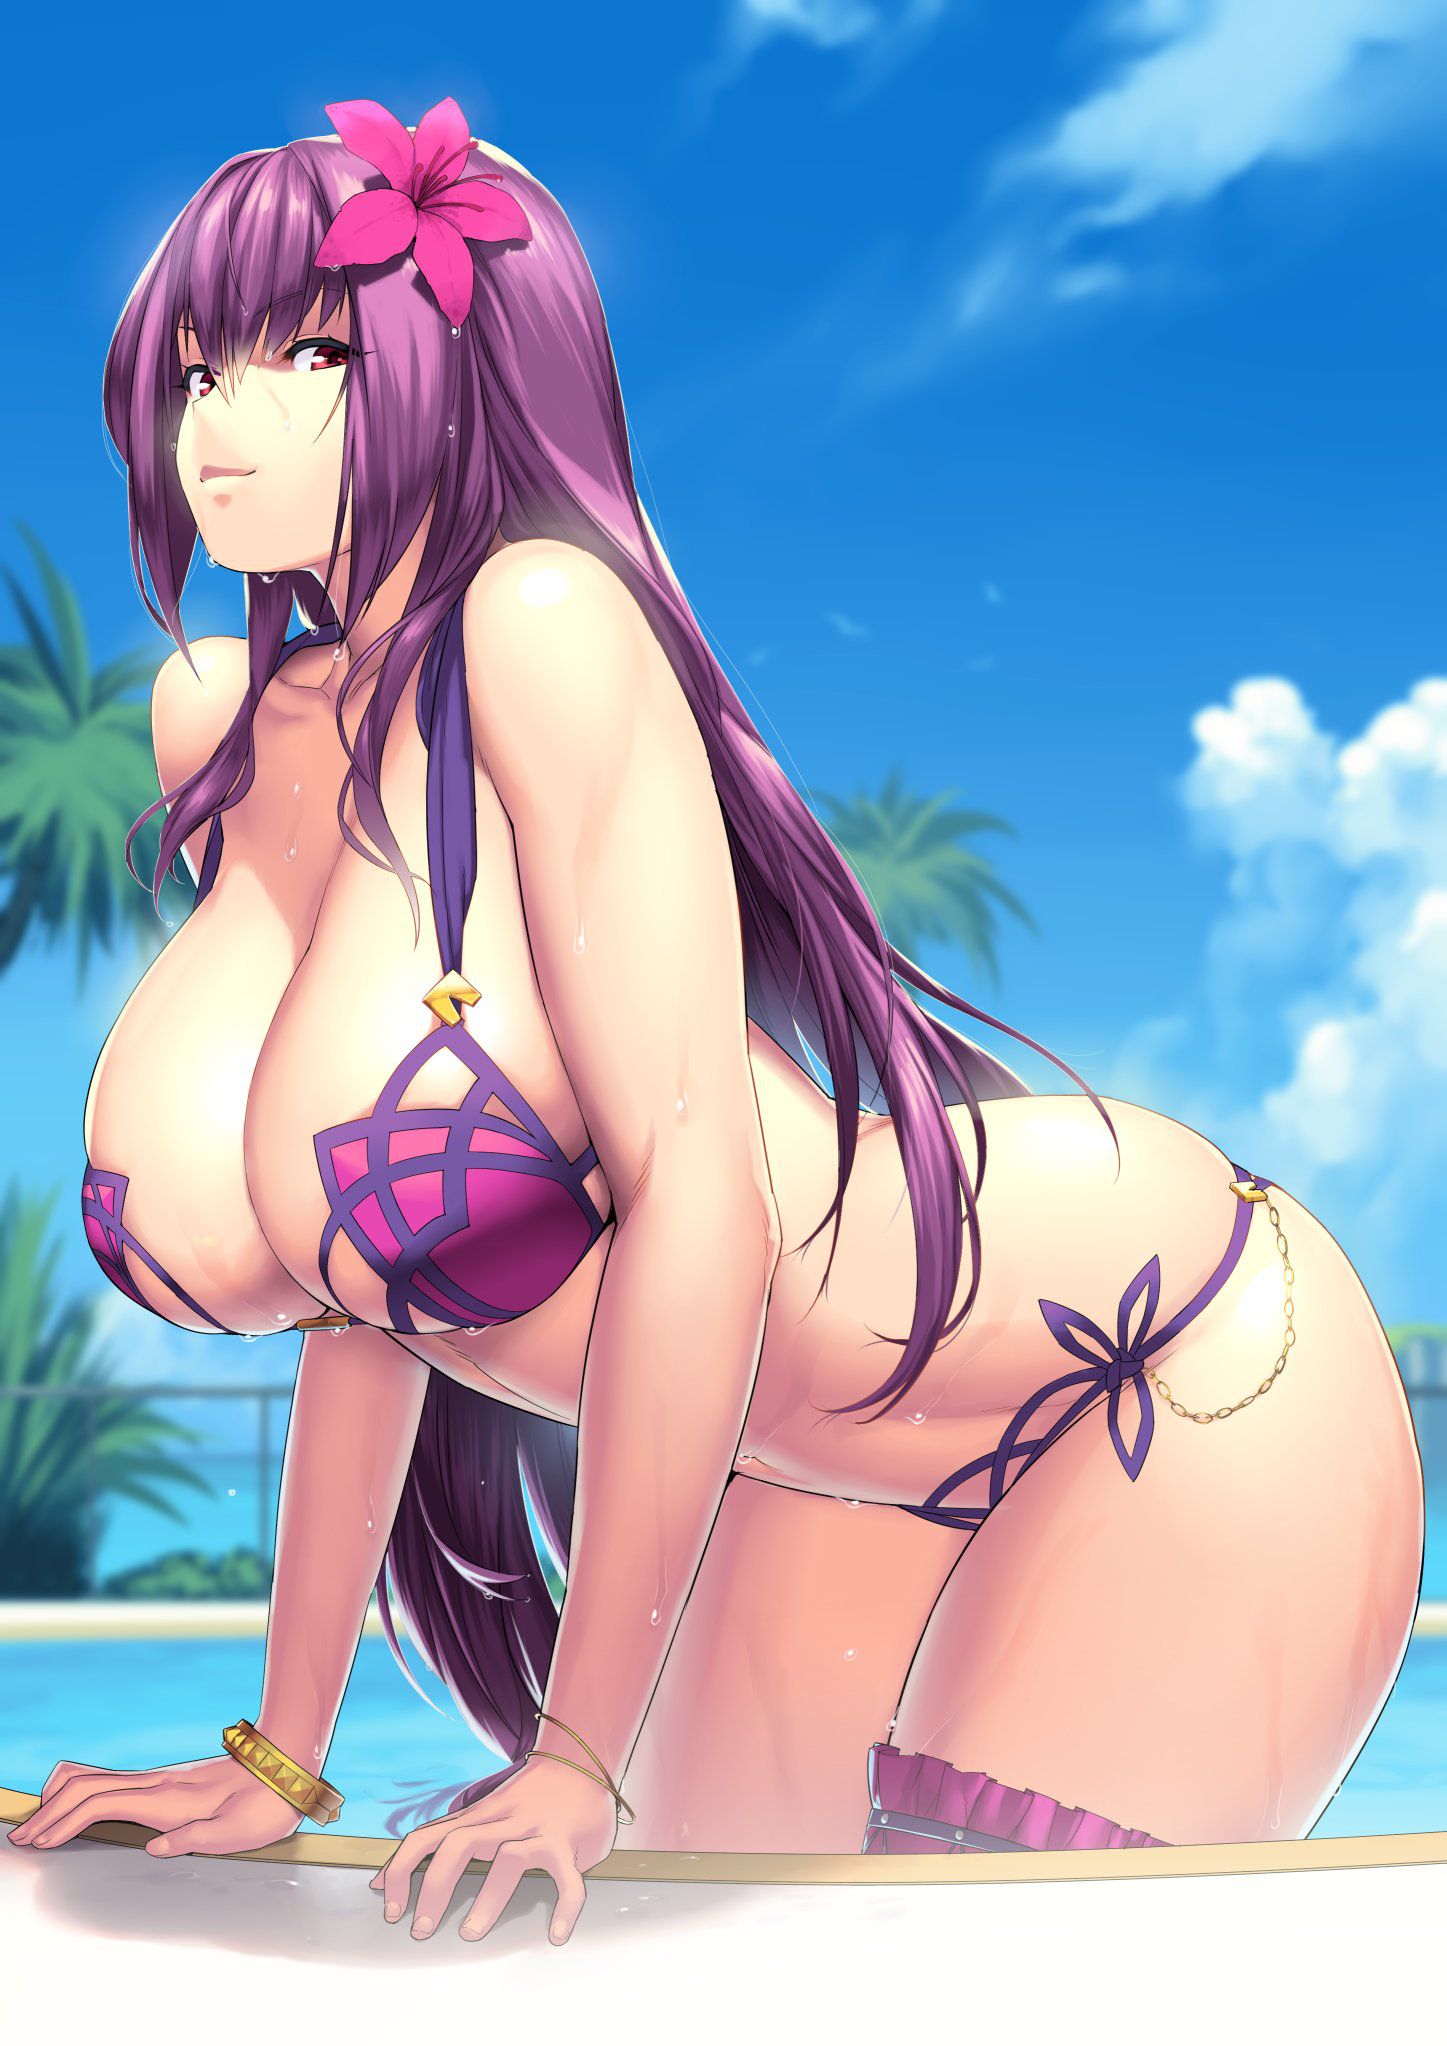 [2nd] Second erotic image of a plump plump girl. 11 [plump] 8